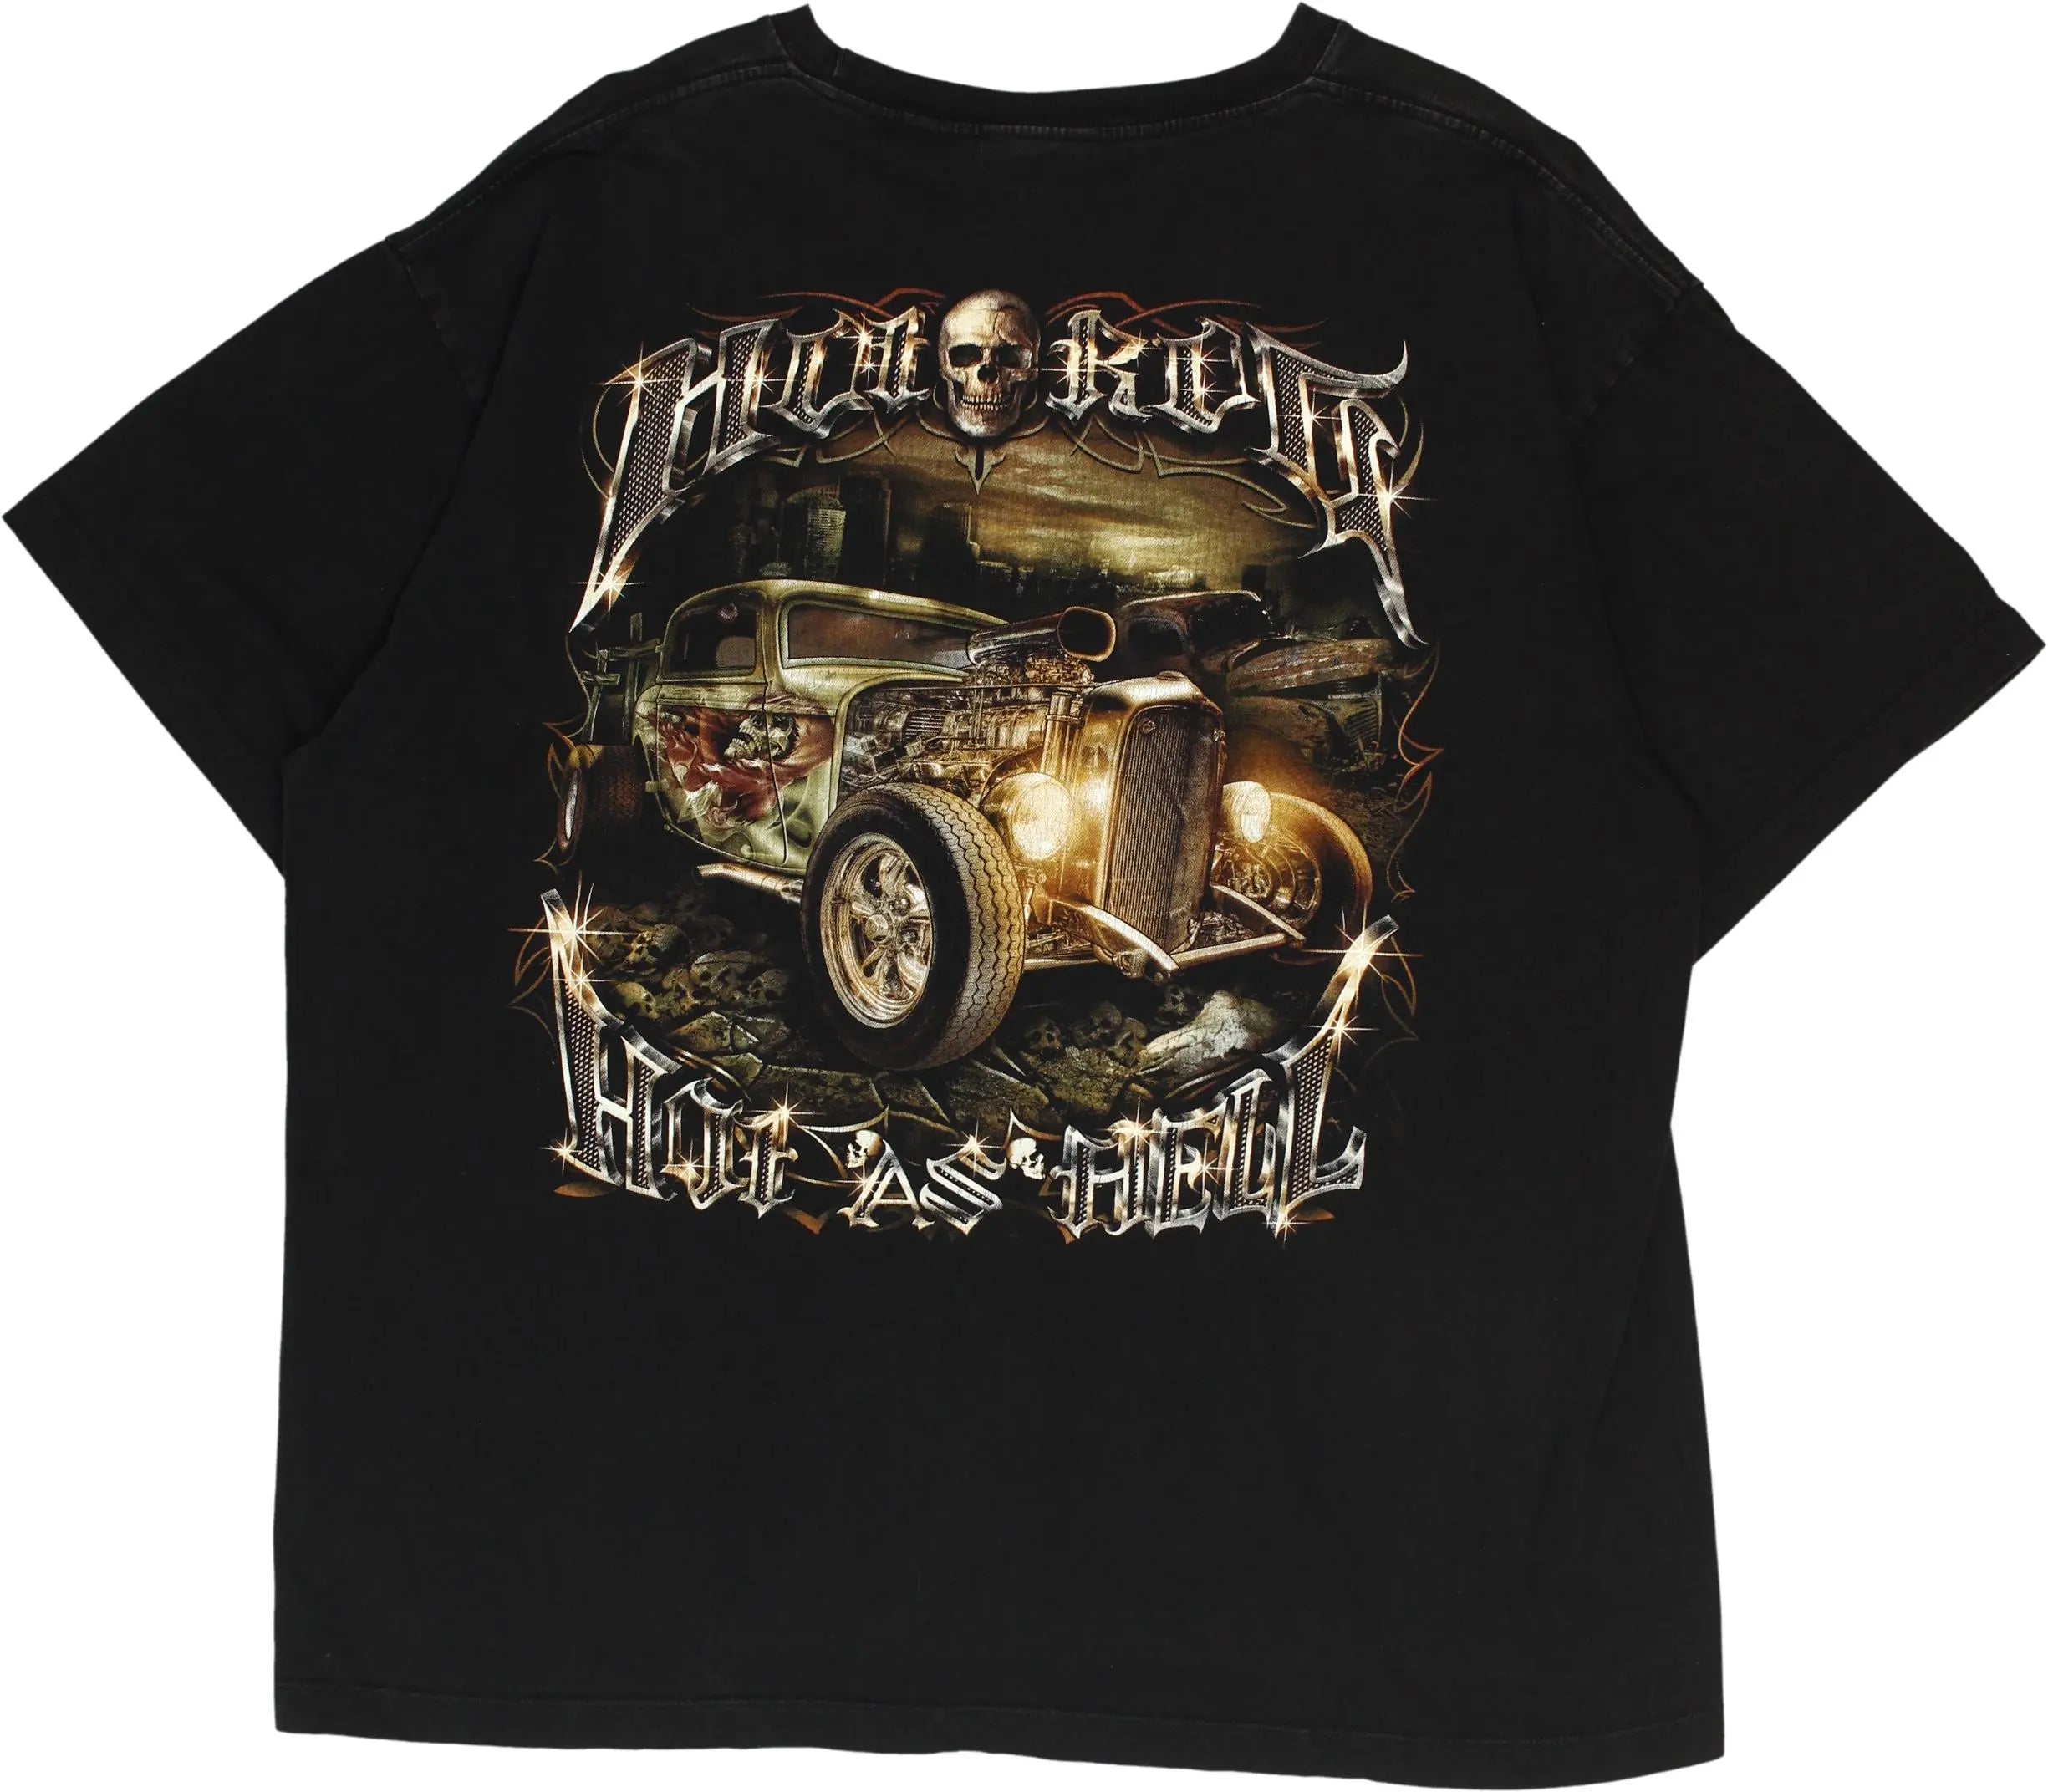 Metal Rock - T-shirt- ThriftTale.com - Vintage and second handclothing